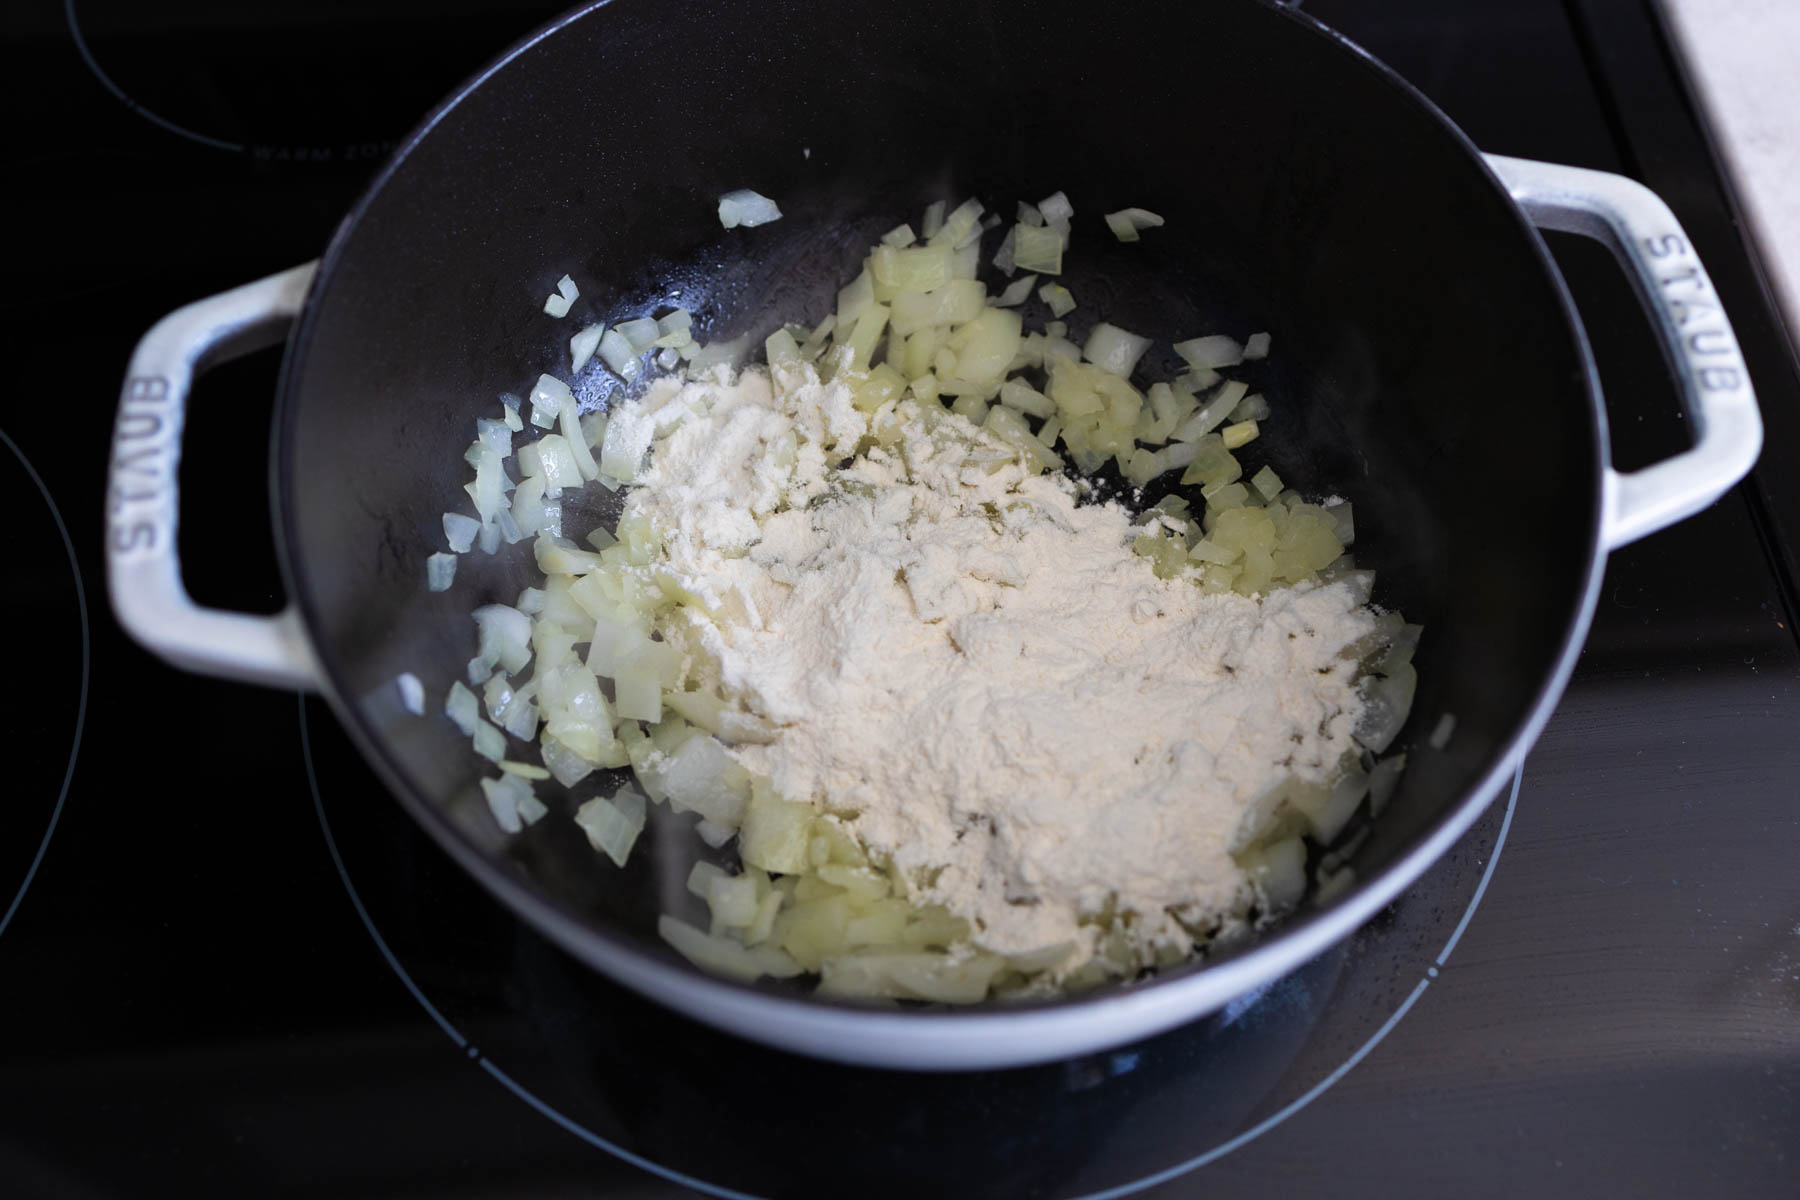 The chopped onion has been cooked, flour is now sprinkled over the top.